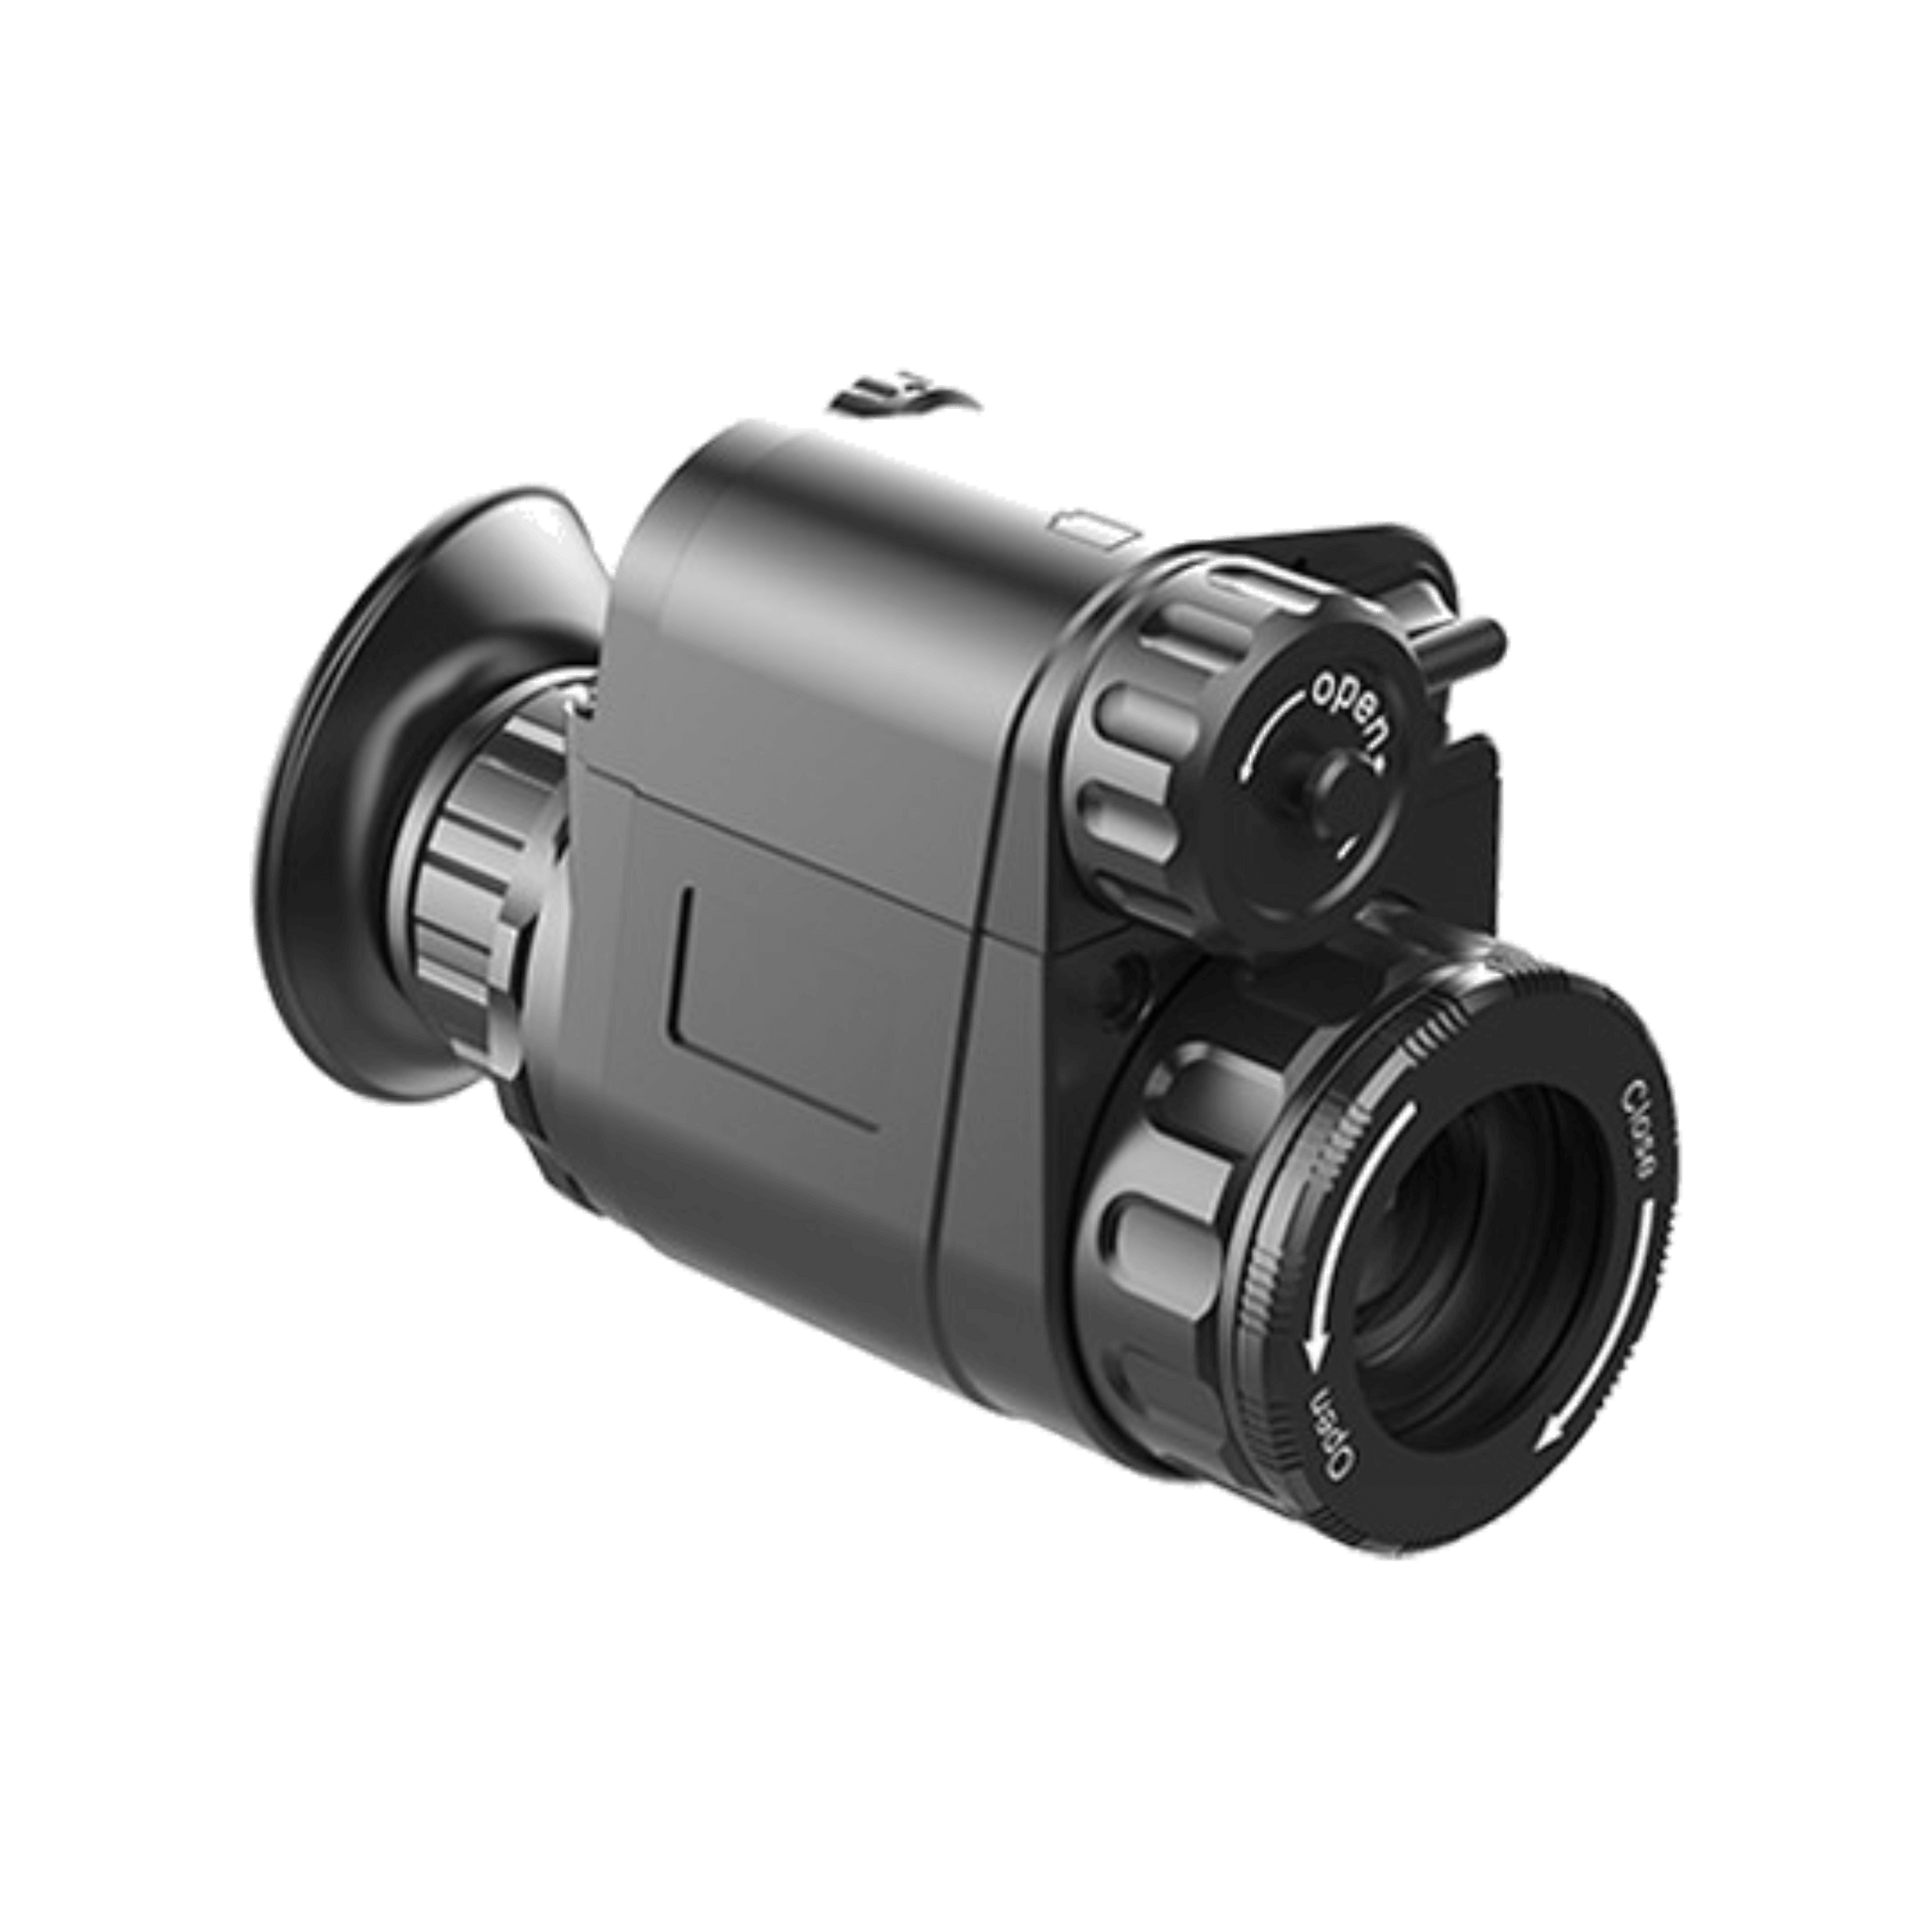 Infiray Mini Series MH25 Handheld and helment mount thermal Imaging monocular - Infiray MH25 TTCW-MH25 front side view